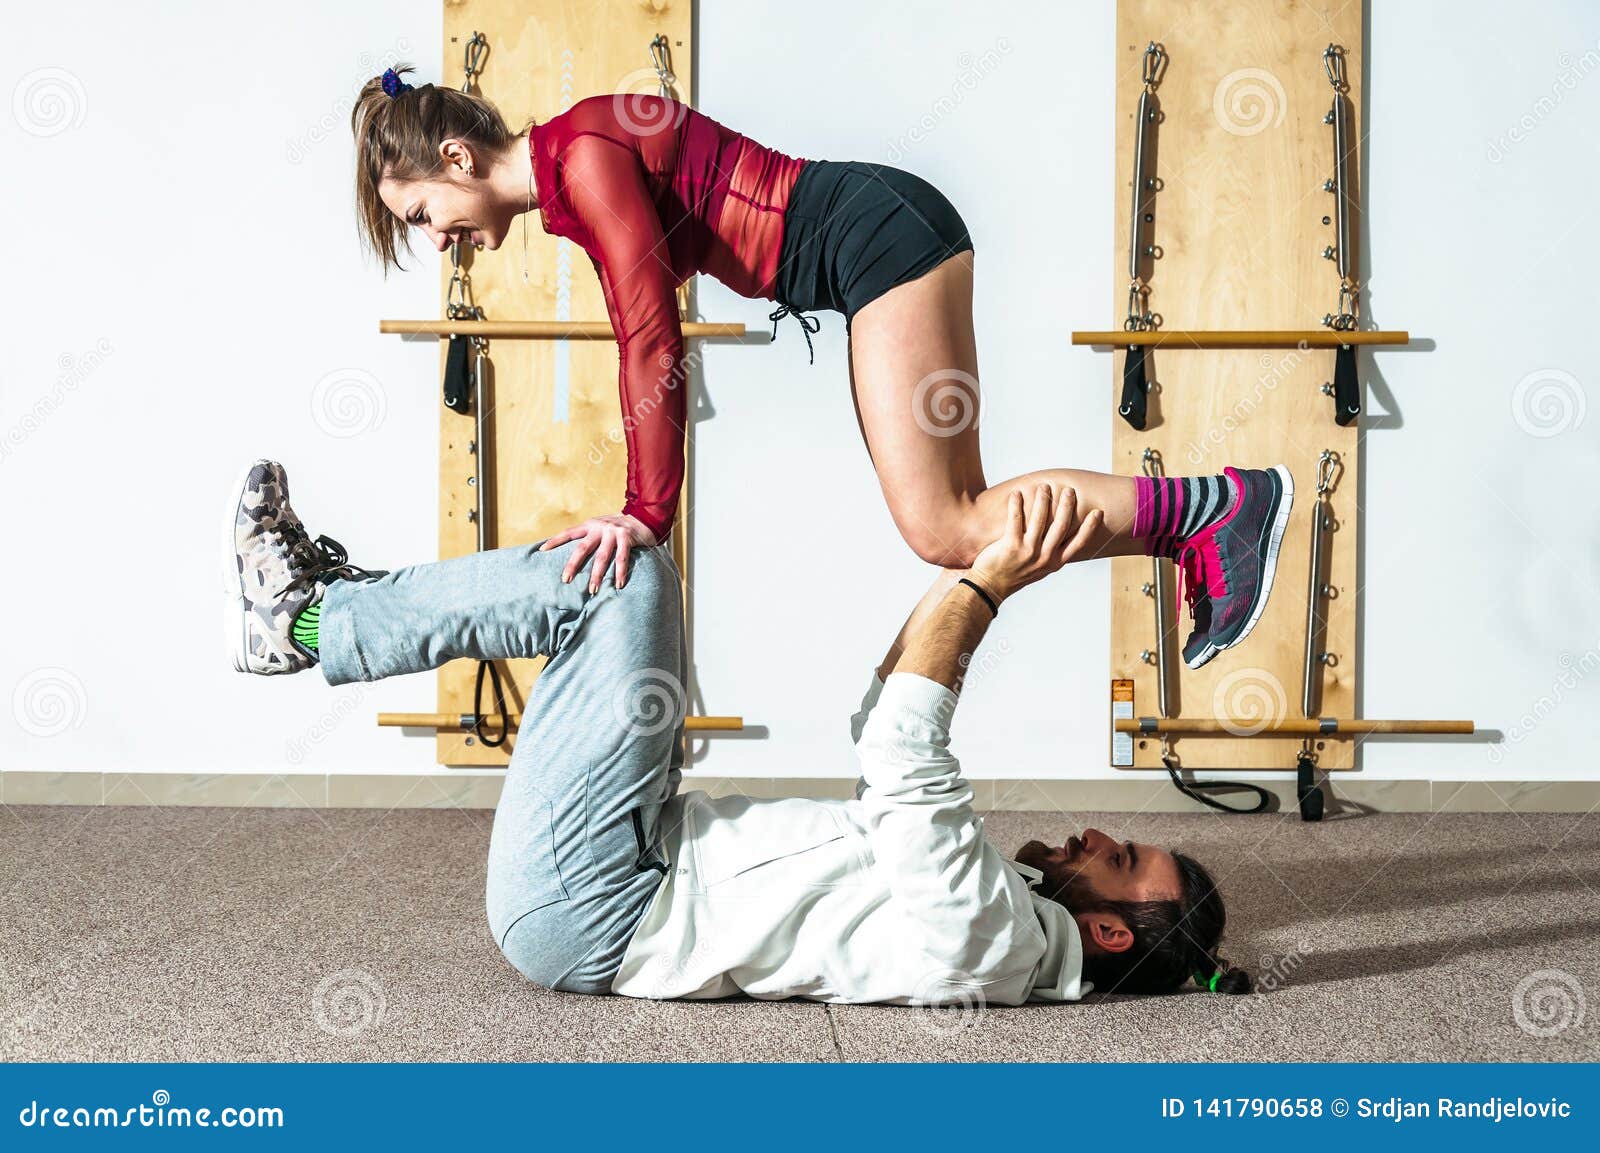 629 Funny Fitness Couple Photos Free Royalty Free Stock Photos From Dreamstime